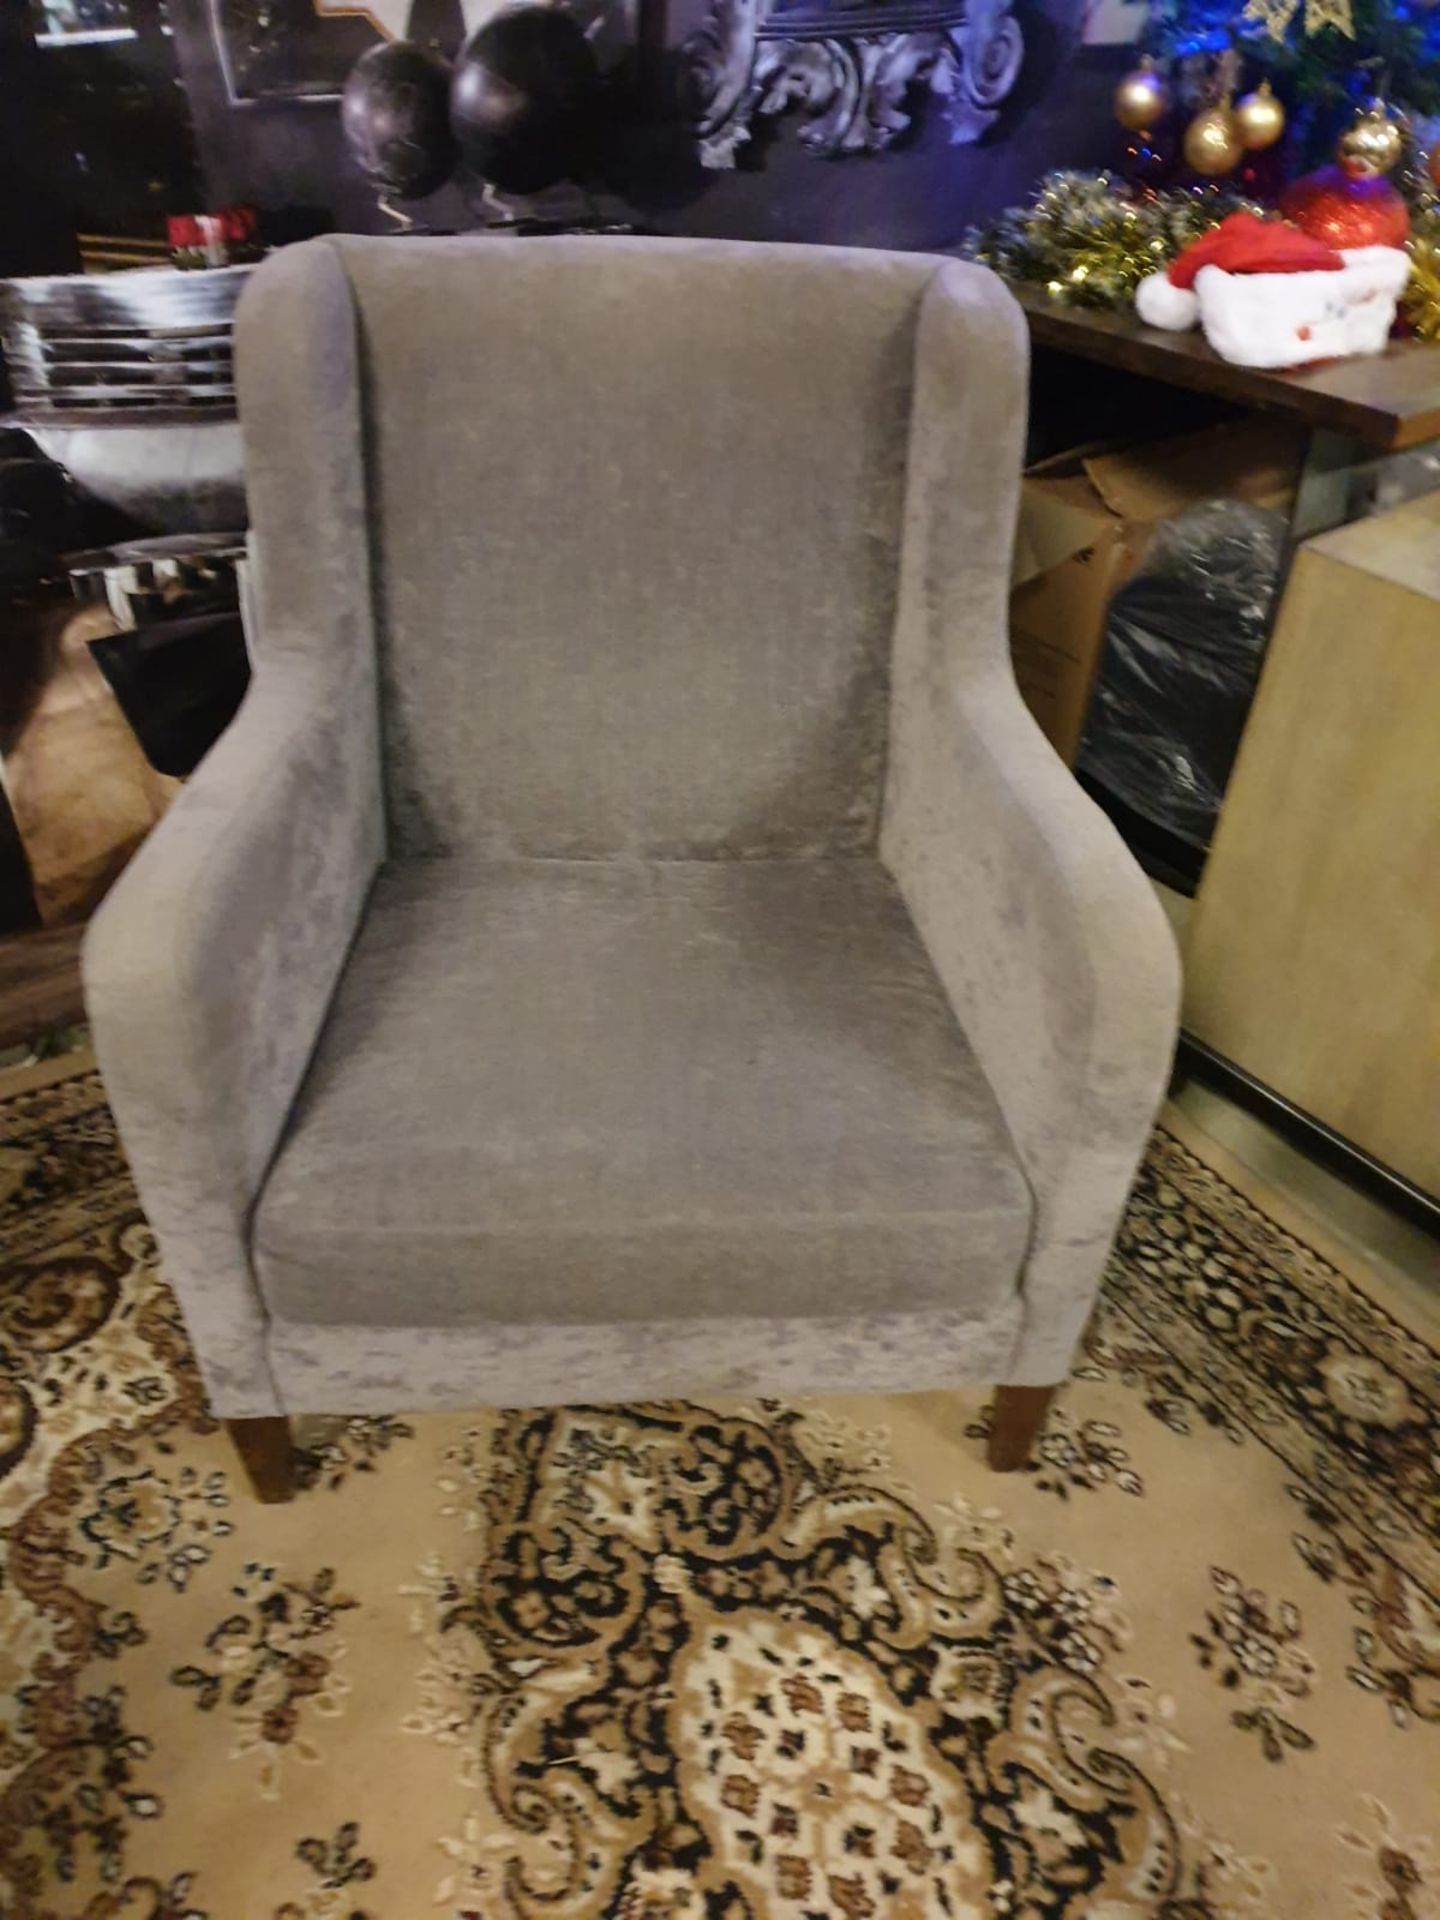 2 X Upholstered Luxury Chairs 1 X Brown Fabric Wingback Chair 72 X 55 X88cm 1 X Side Chair 74 X 56 X - Image 2 of 2